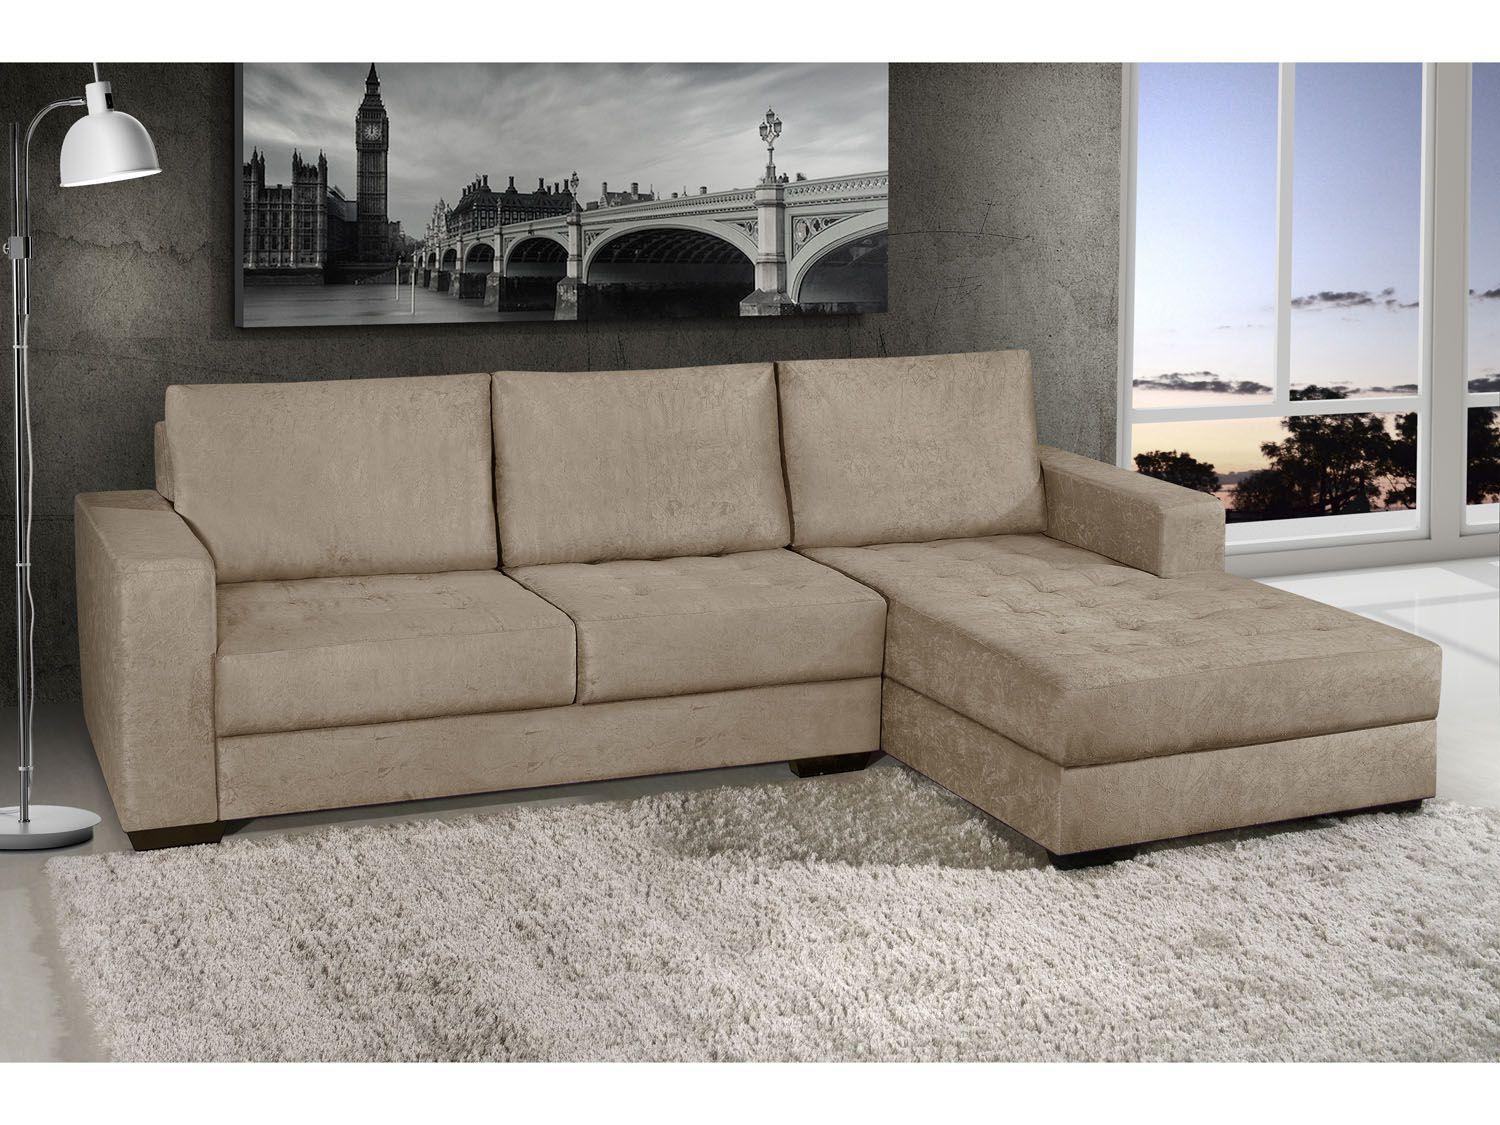 Sof  Chaise  2 Lugares Suede N pole American Comfort 